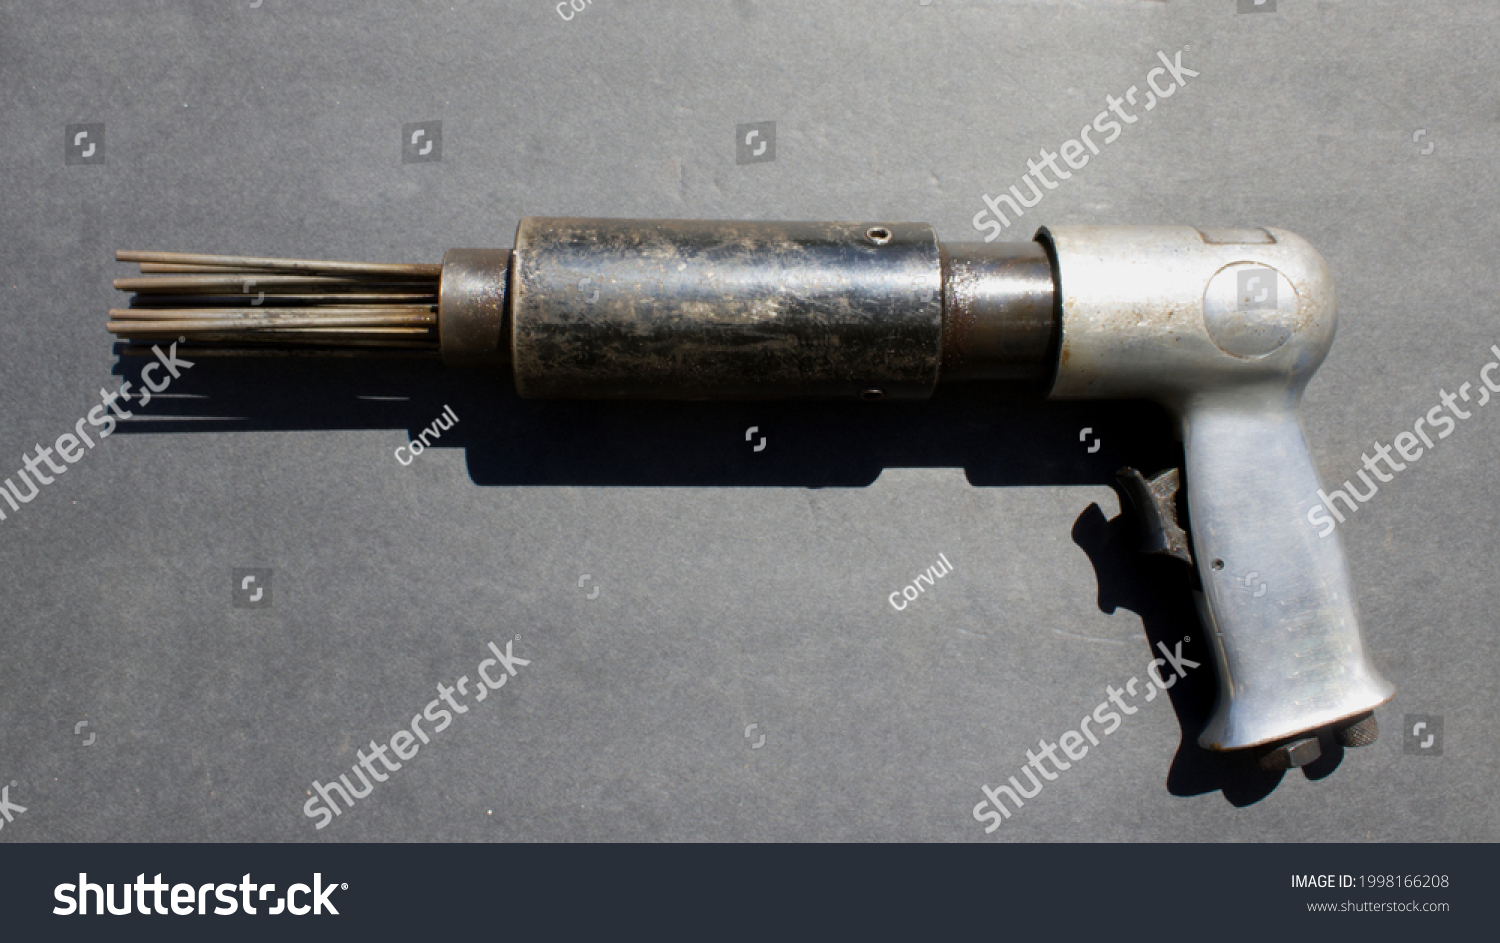 An Air Needle Scaler on a Black Background #1998166208